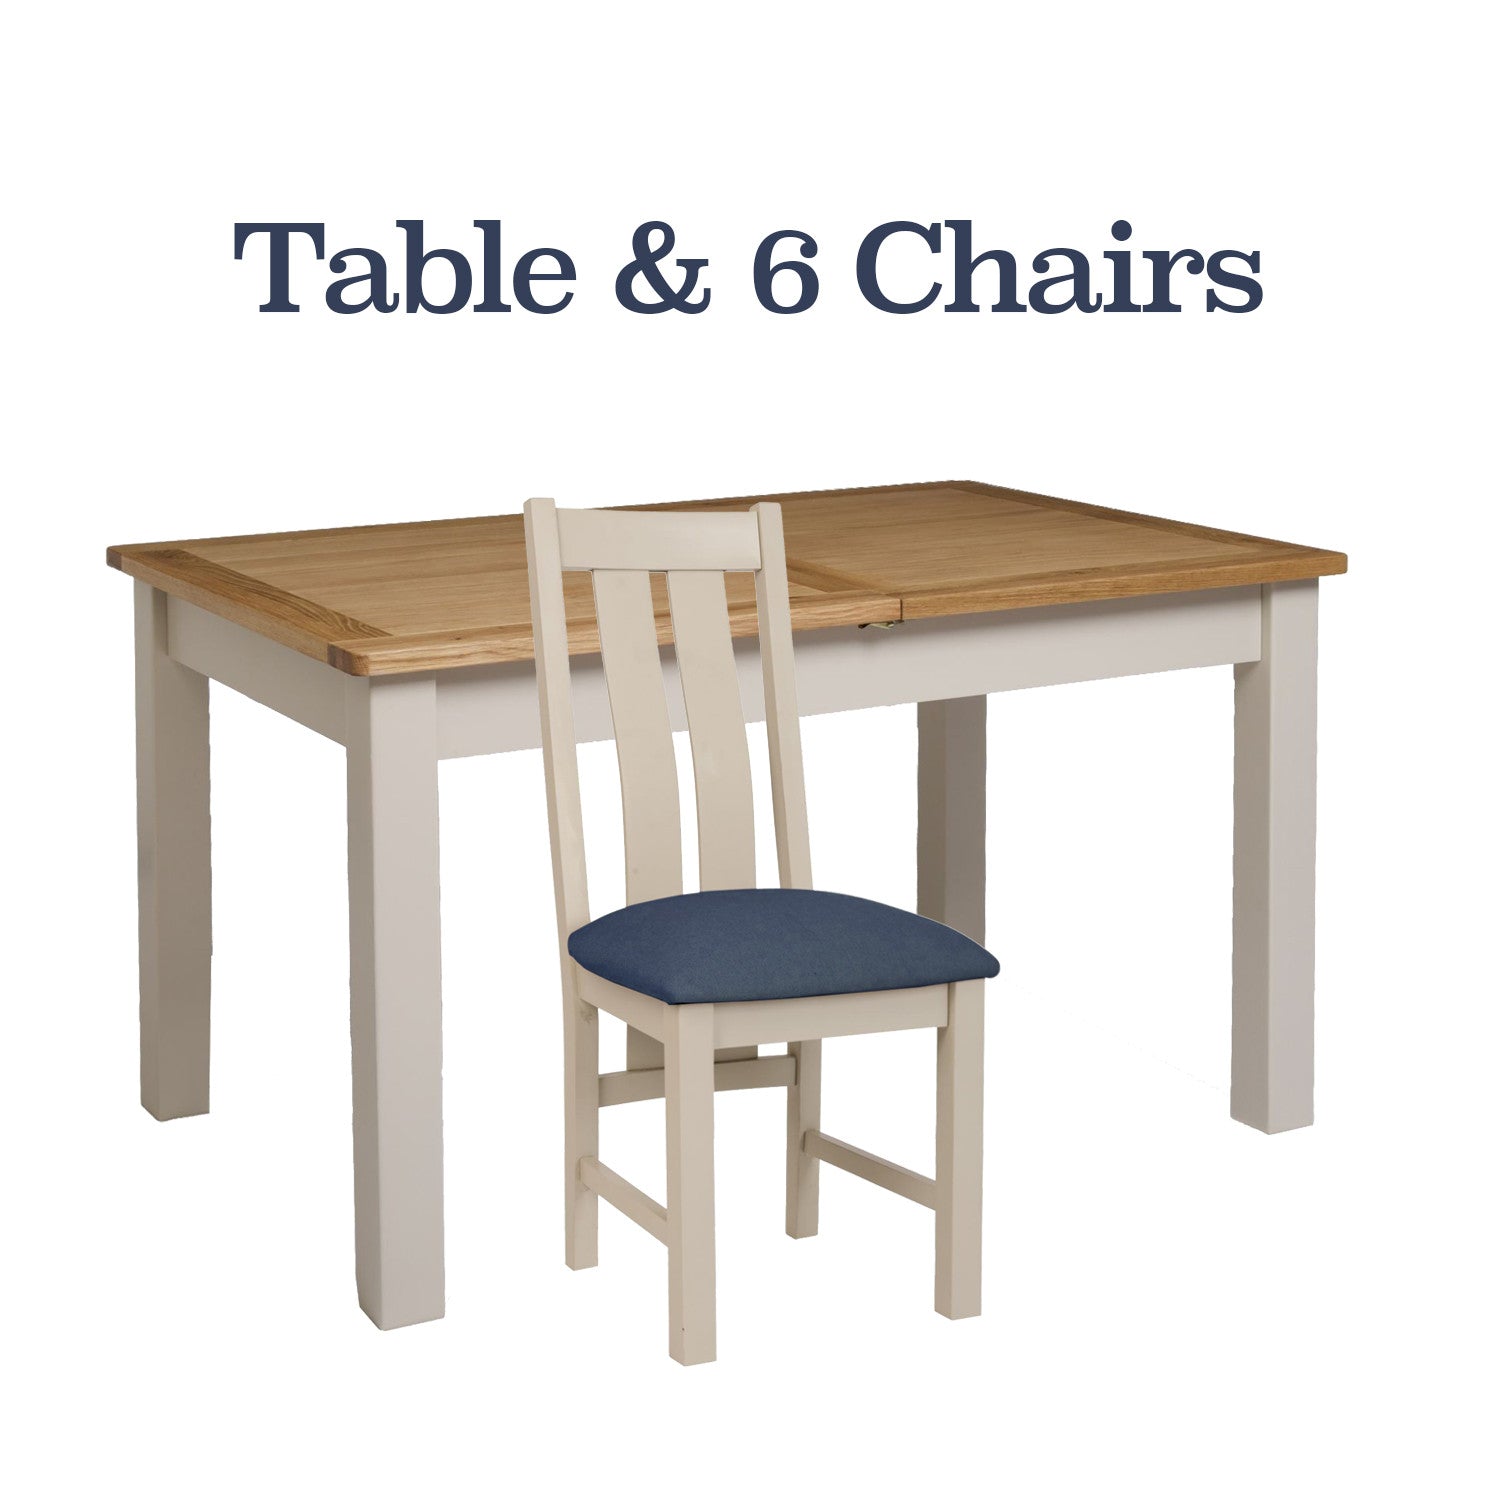 Portland Oak Painted Dining Table 6 Chairs Package Portland